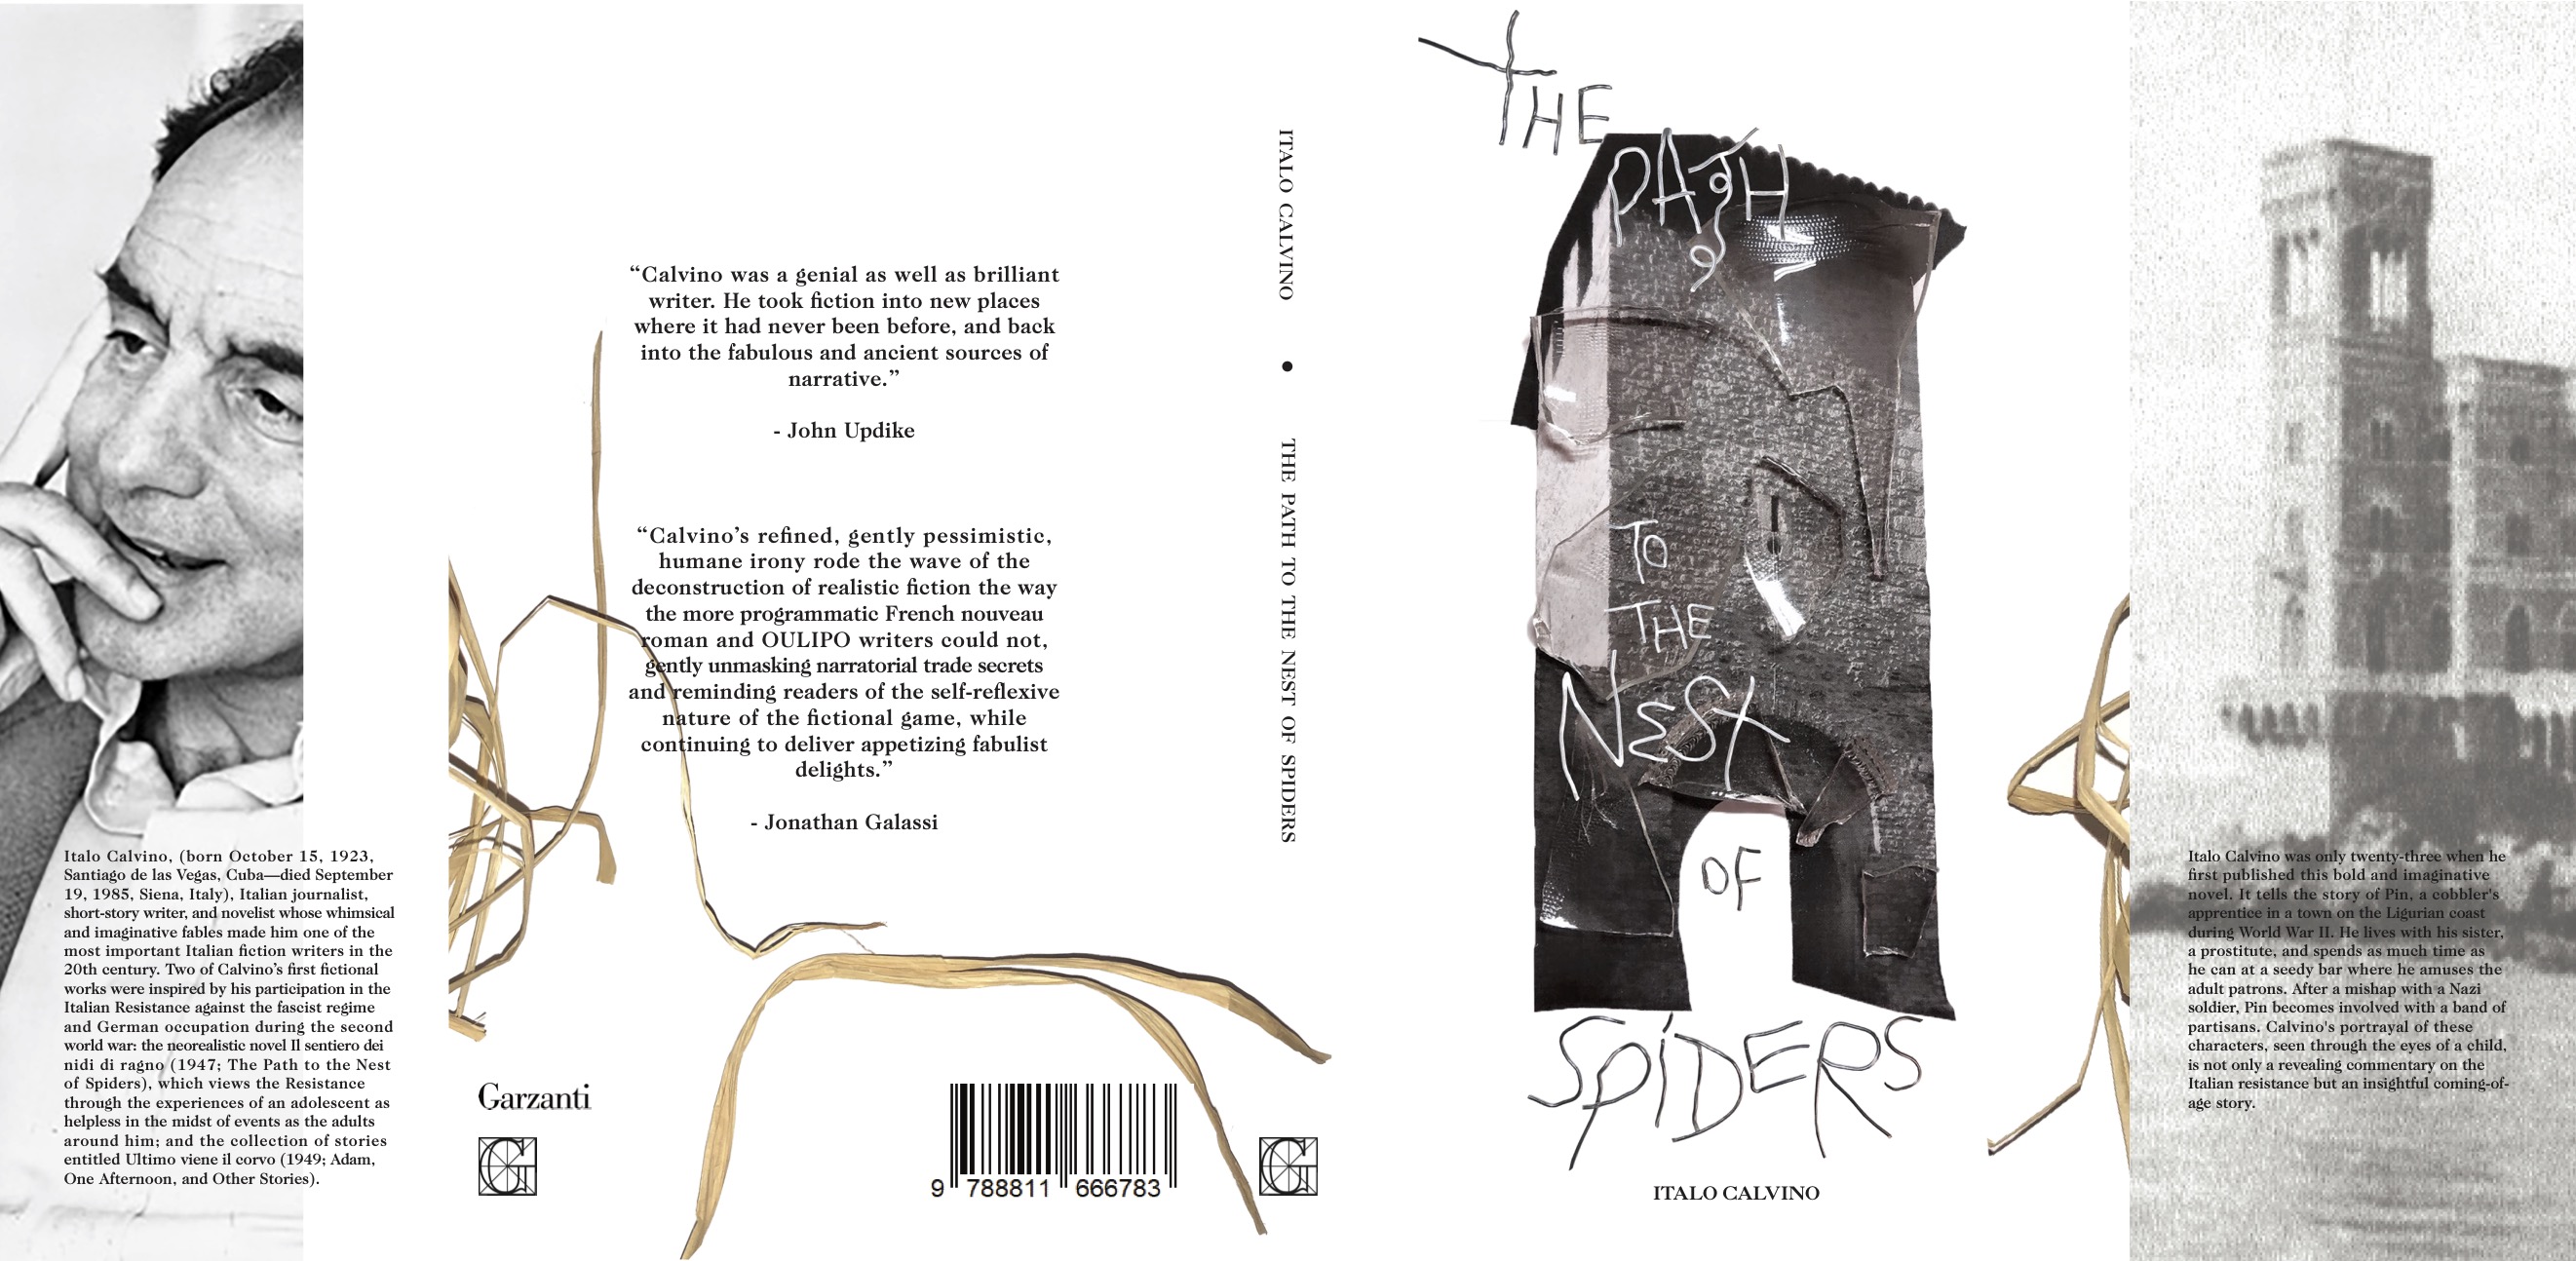 Italo Calvino, 'The Path to the Nest of Spiders' Book Dust Jacket